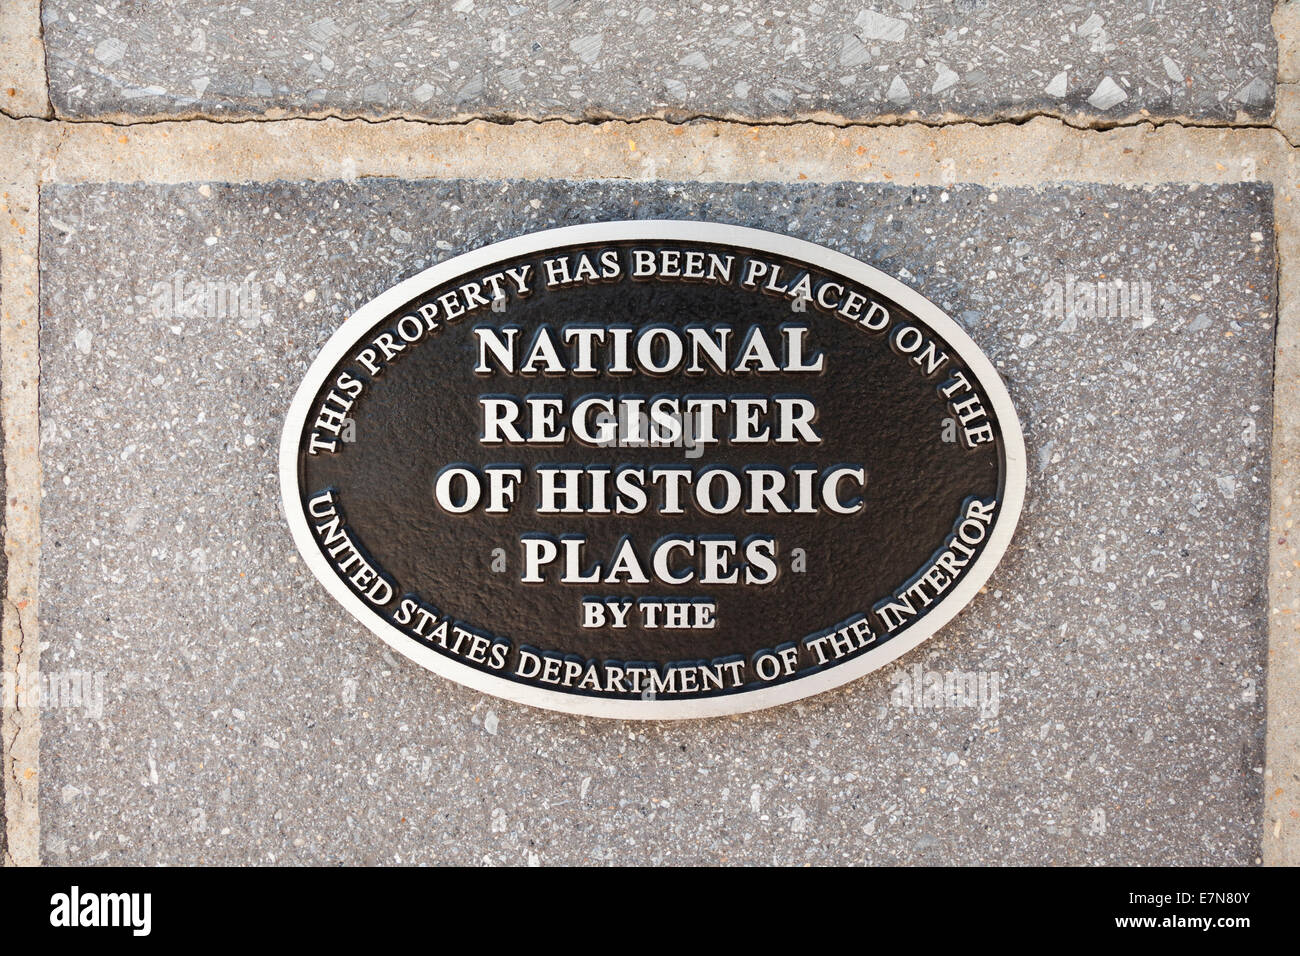 National Register of Historic Places Plaque - USA Stockfoto